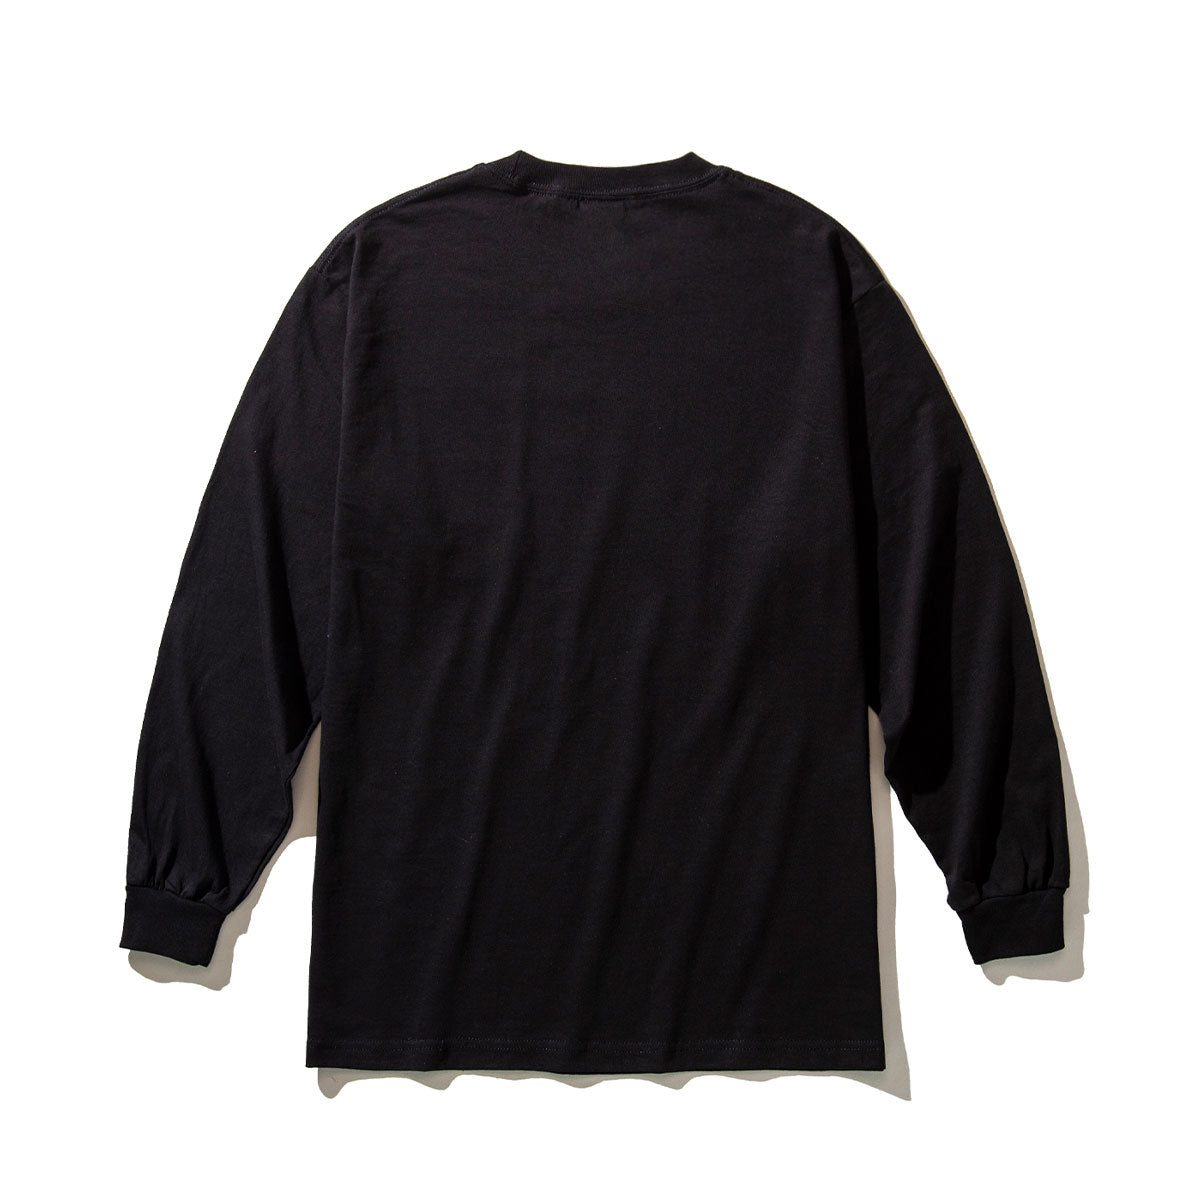 Knit L/S T-Shirt - Business As Usual